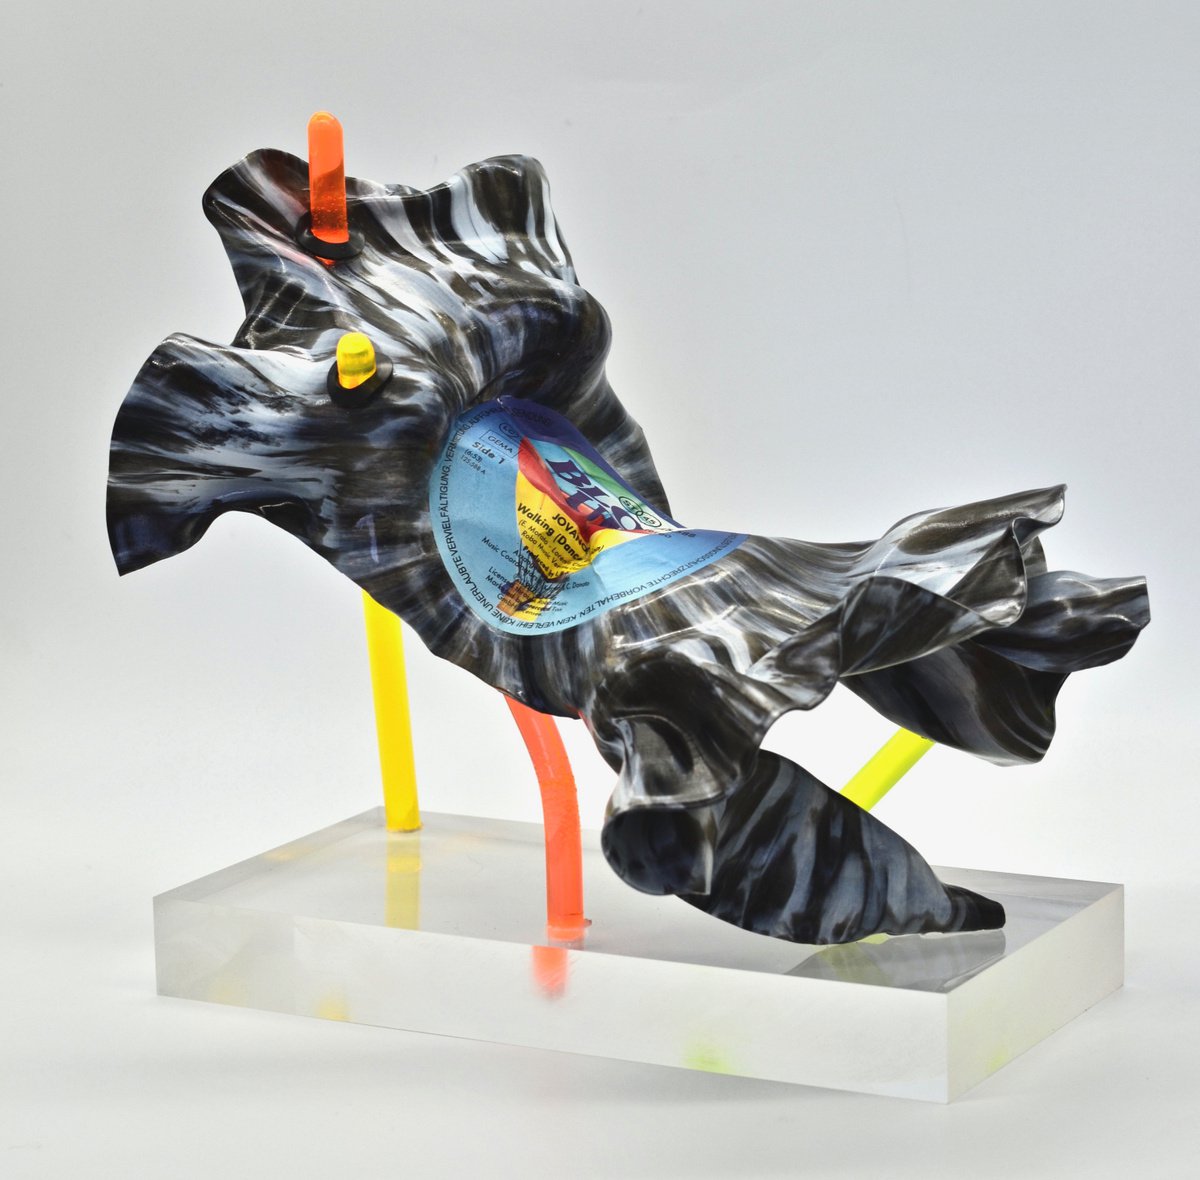 Vinyl Music Record Sculpture - Up On The Rave by Seona Mason